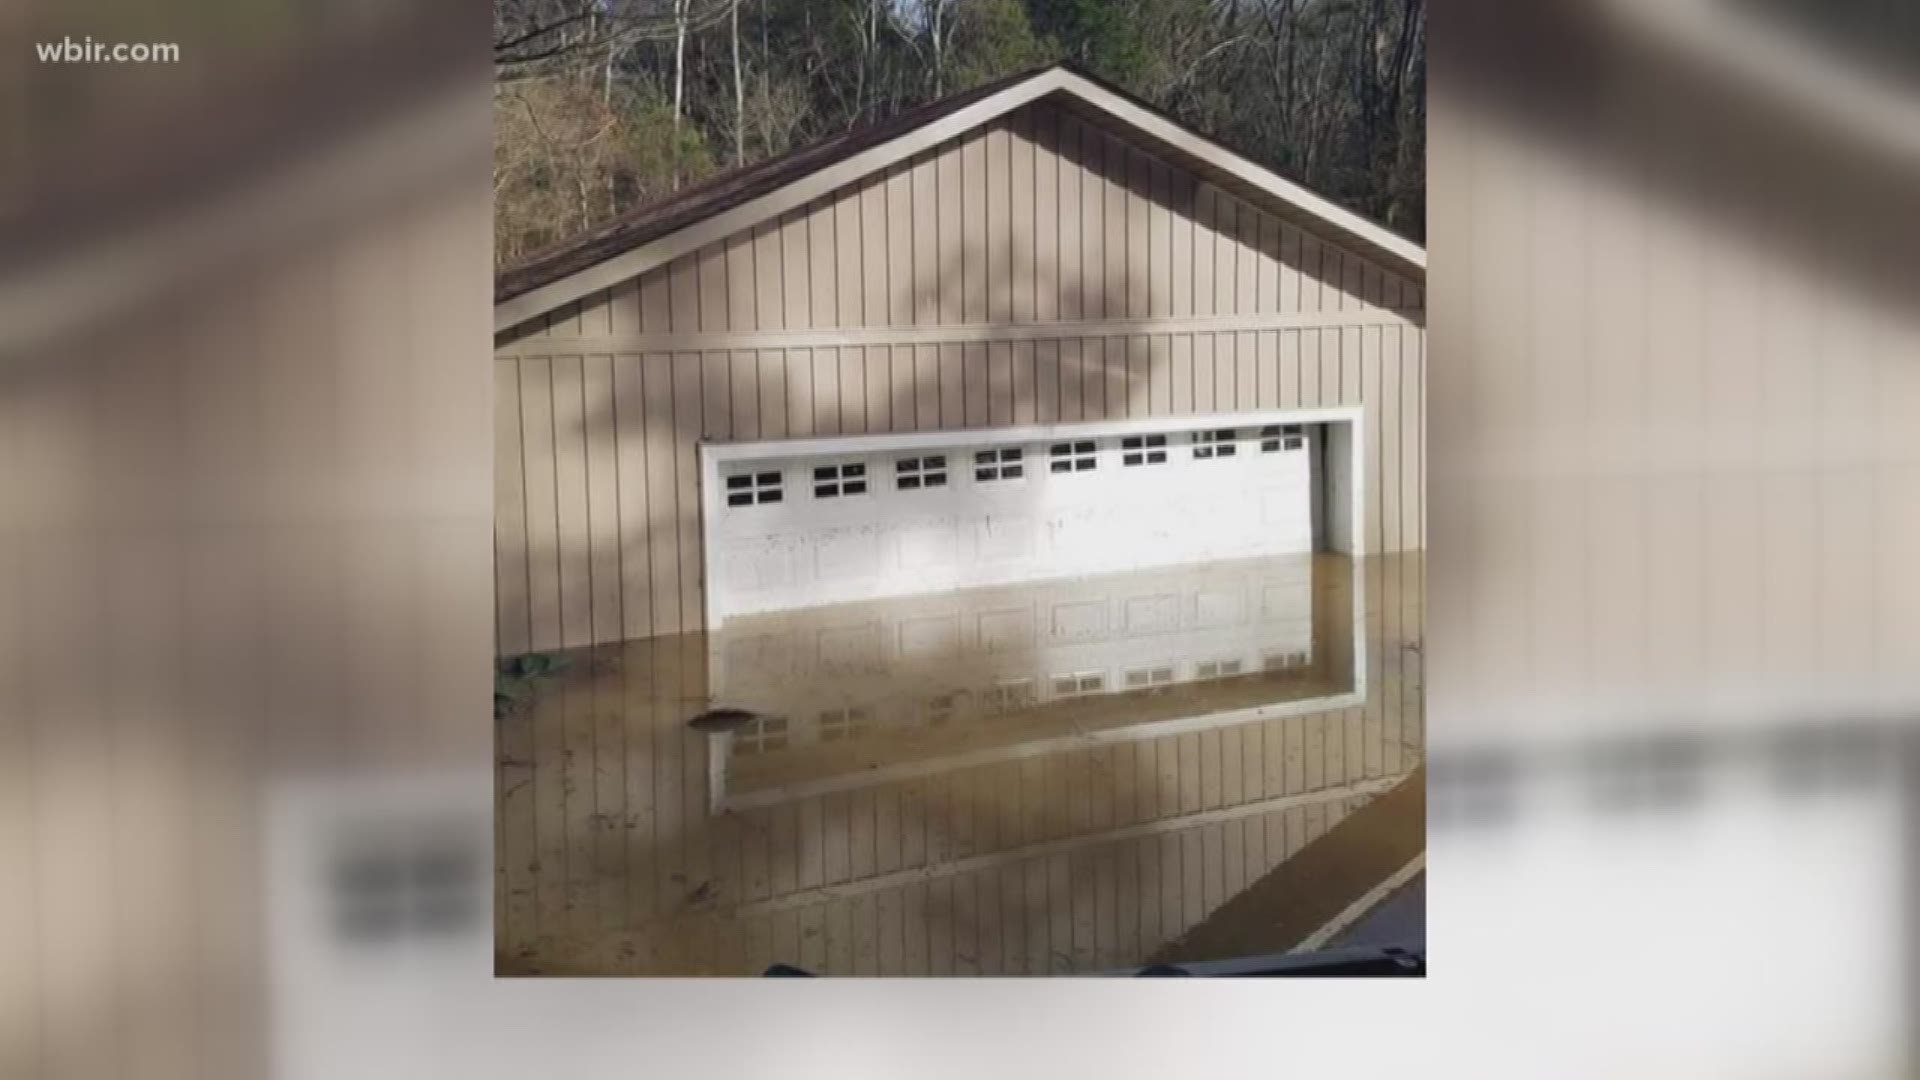 The family was awakened early Saturday morning with their goats crying and water rushing into their home. They rescued the animals but lost everything else. Their home is not near a body of water.